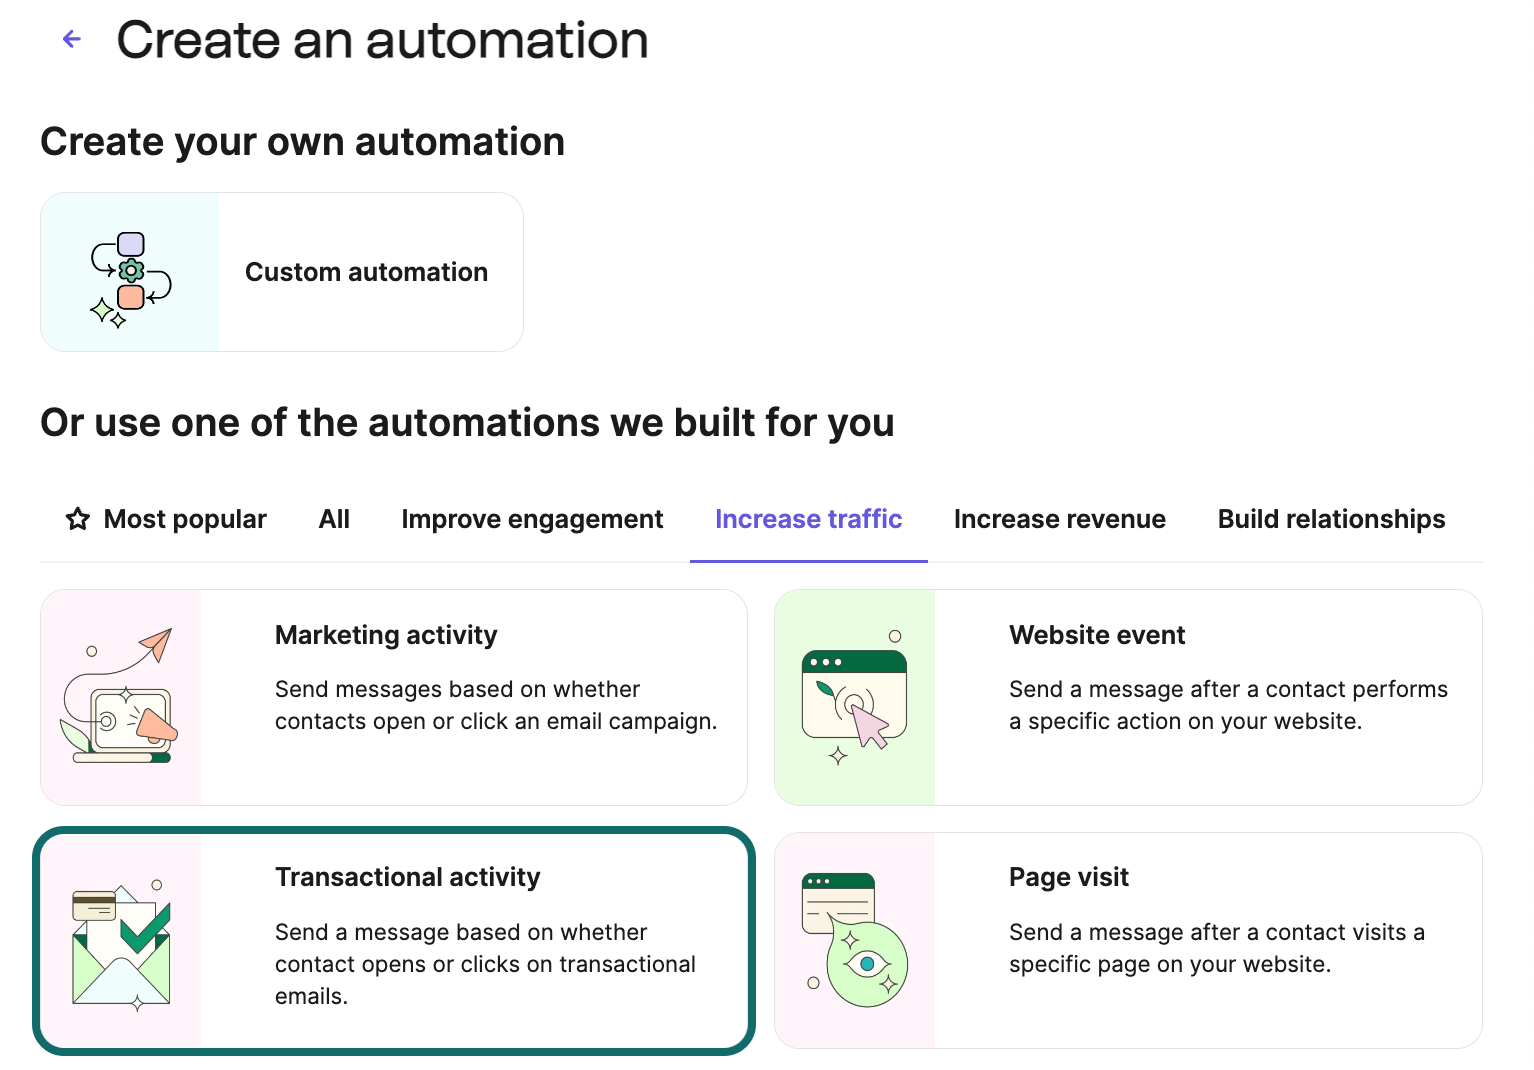 automations_transactional-activity-card_EN-US.png